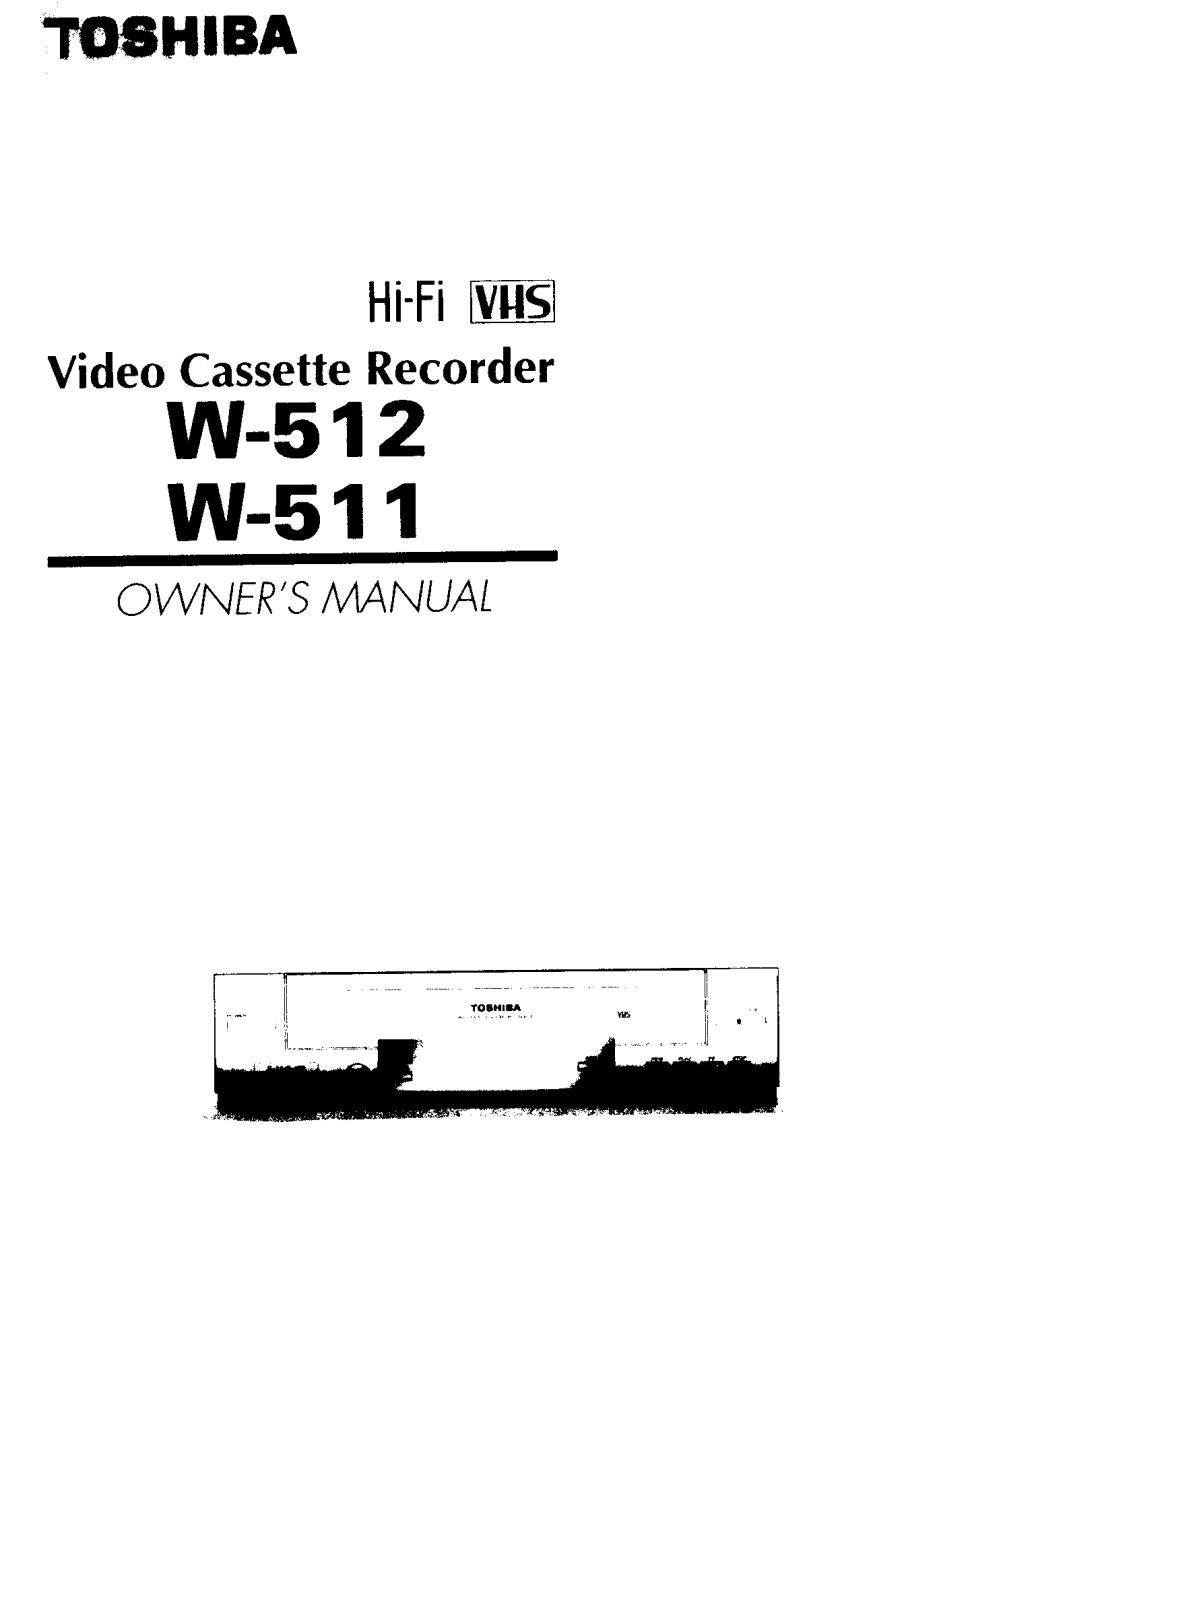 Toshiba W-512 Owner’s Manual